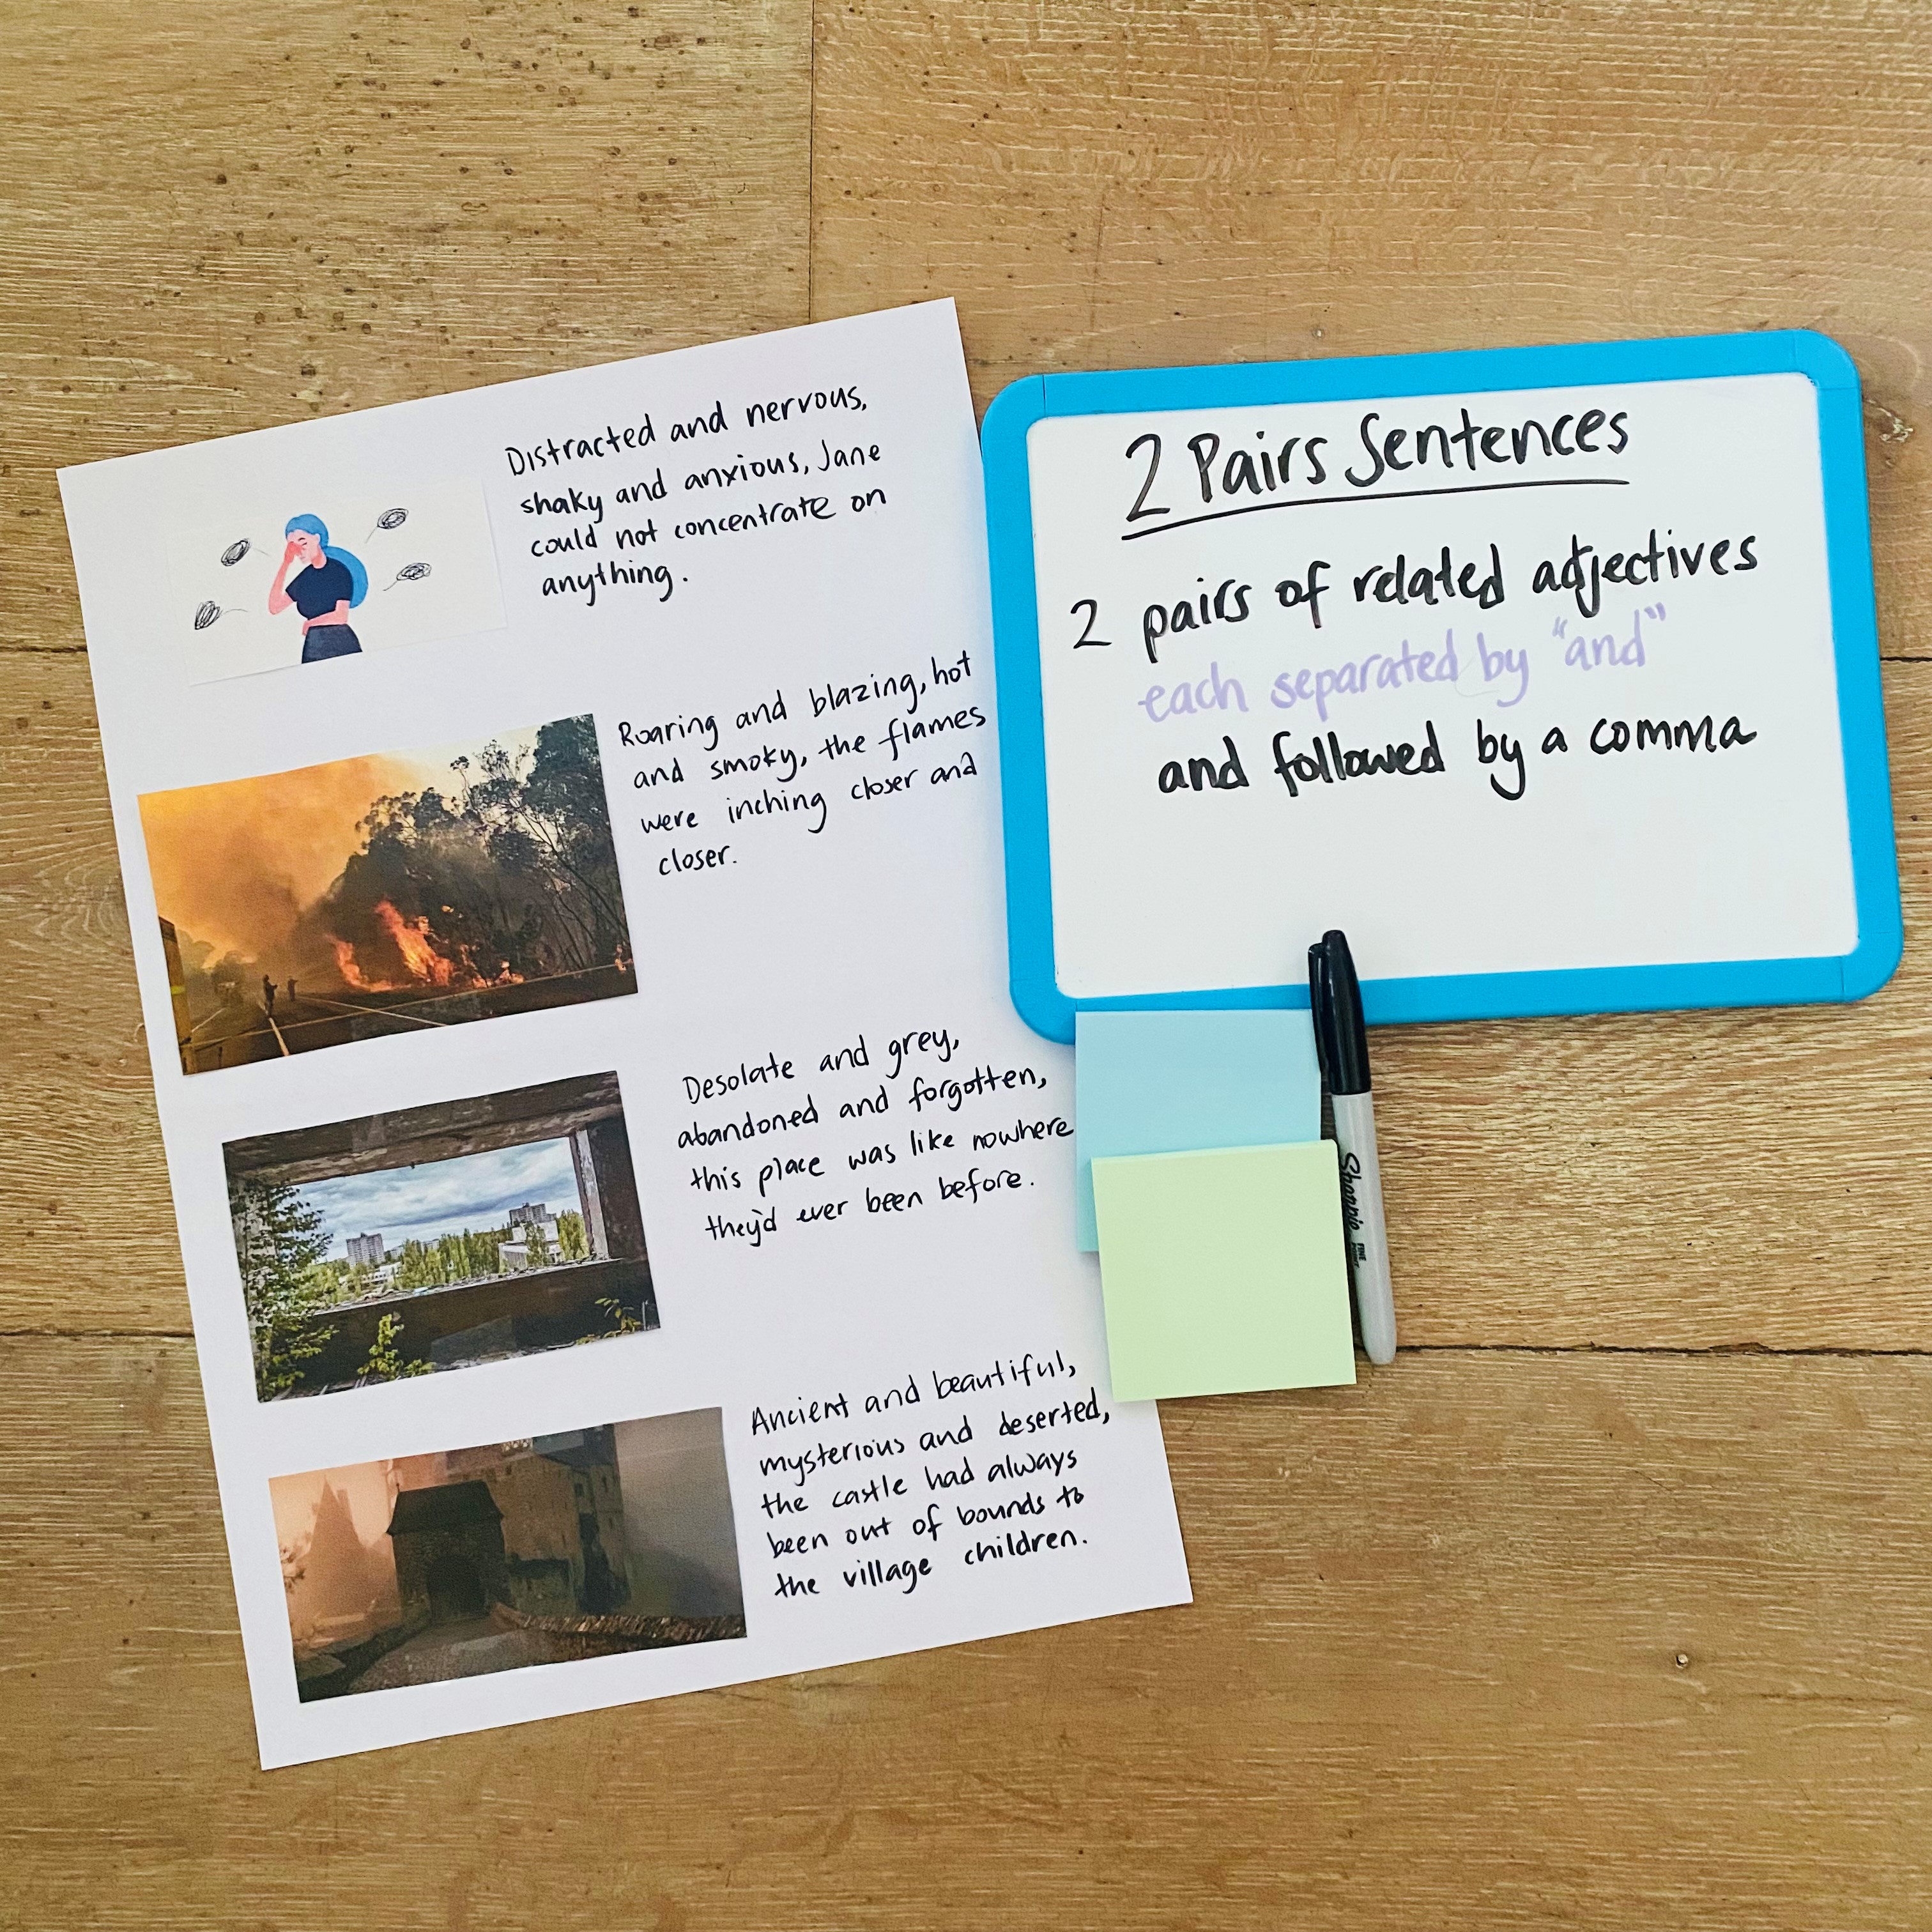 An engaging writing lesson to support students to write detailed sentences, following the 2 Pairs Sentence structure. The lesson equips students with the skills required to construct a range of varied sentence types, using related adjectives in pairs to describe events in detail.